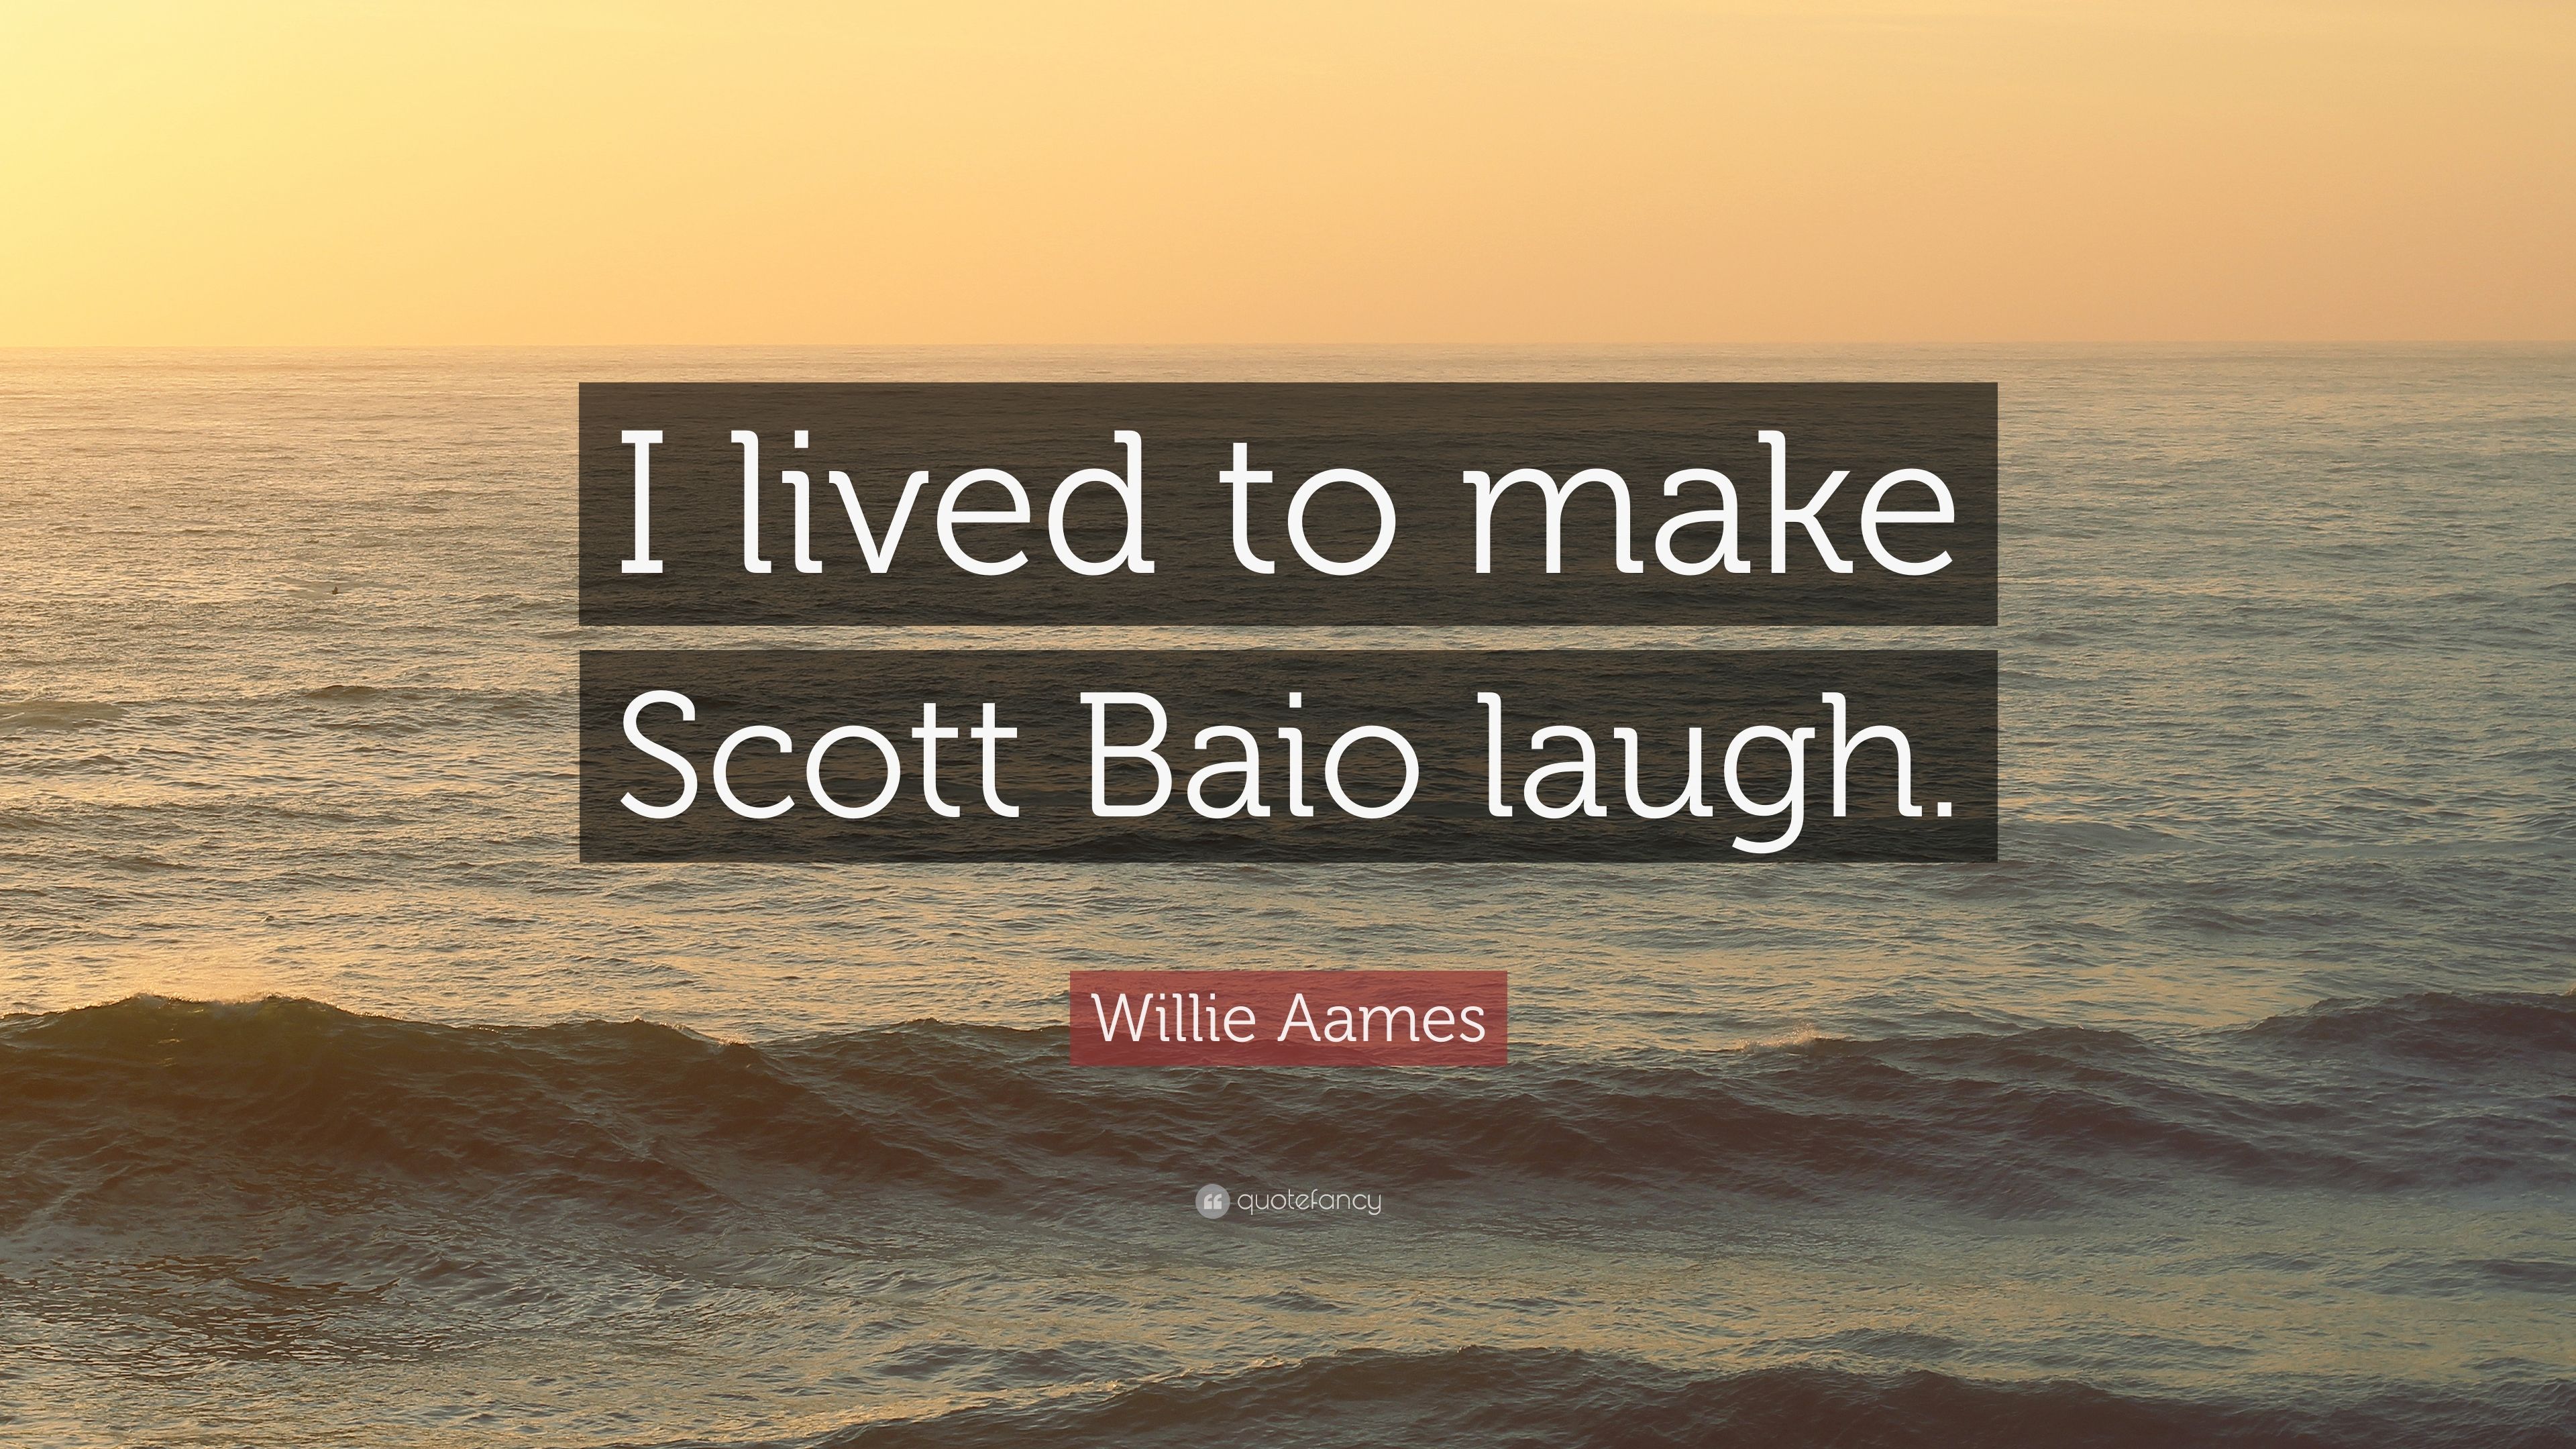 Willie Aames Quote: “I lived to make Scott Baio laugh.” 7